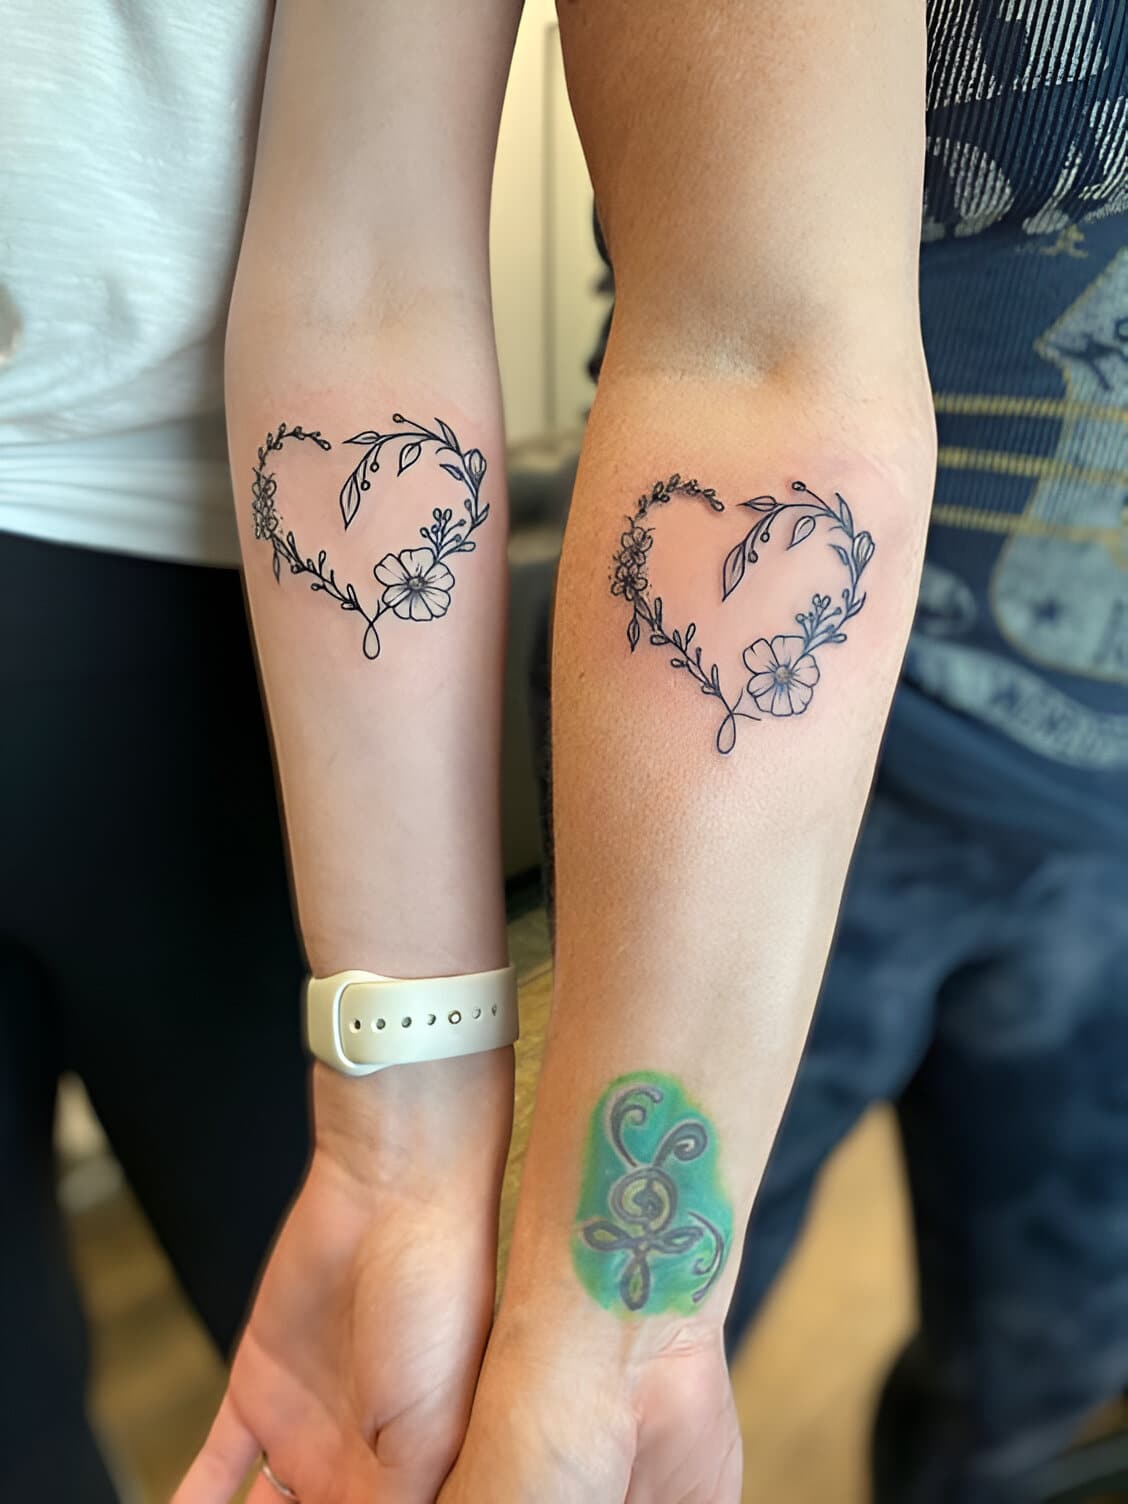 30 Elegant Matching Heart Tattoos To Get With Your Partner ASAP 3